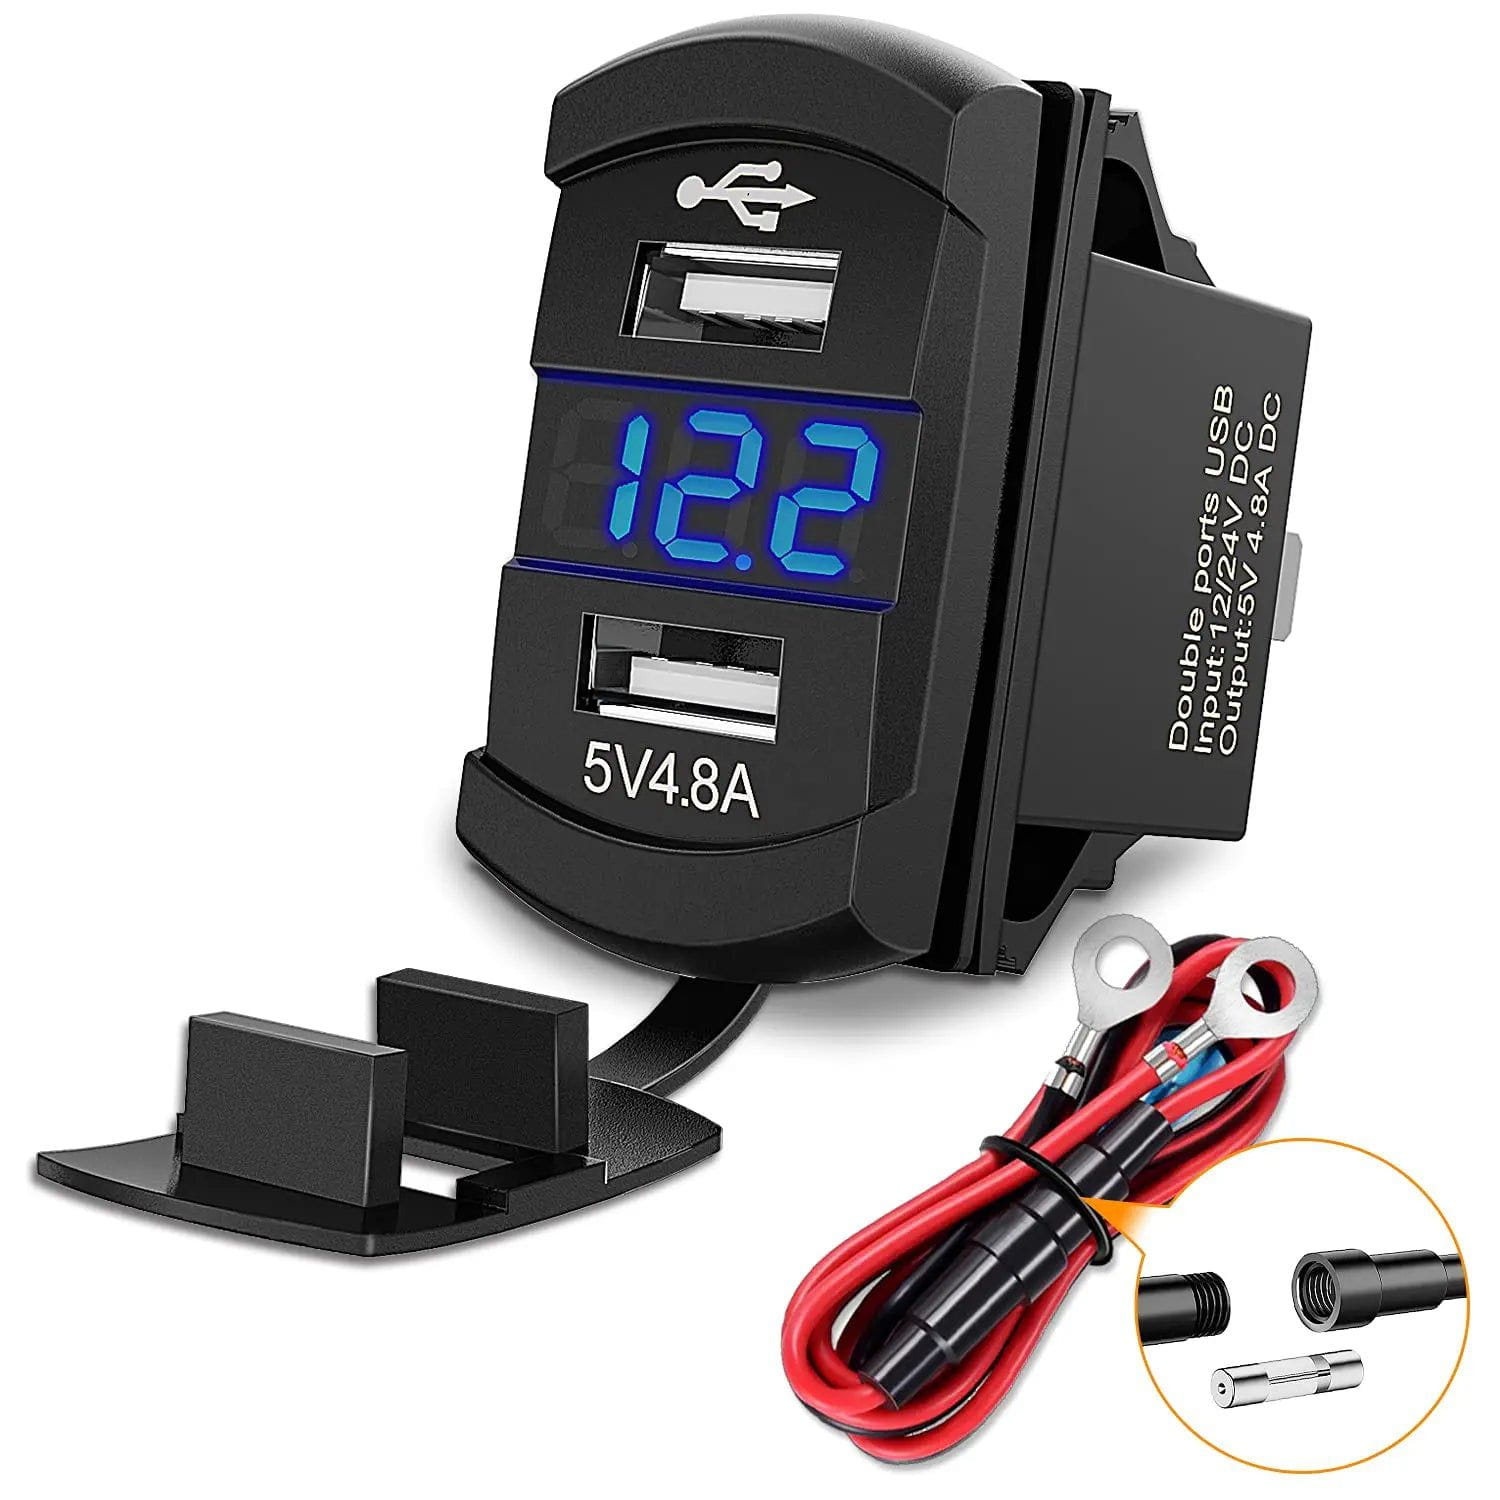 Vehicle Parts & Accessories Rocker Switch Style Dual USB Charger LED Voltmeter